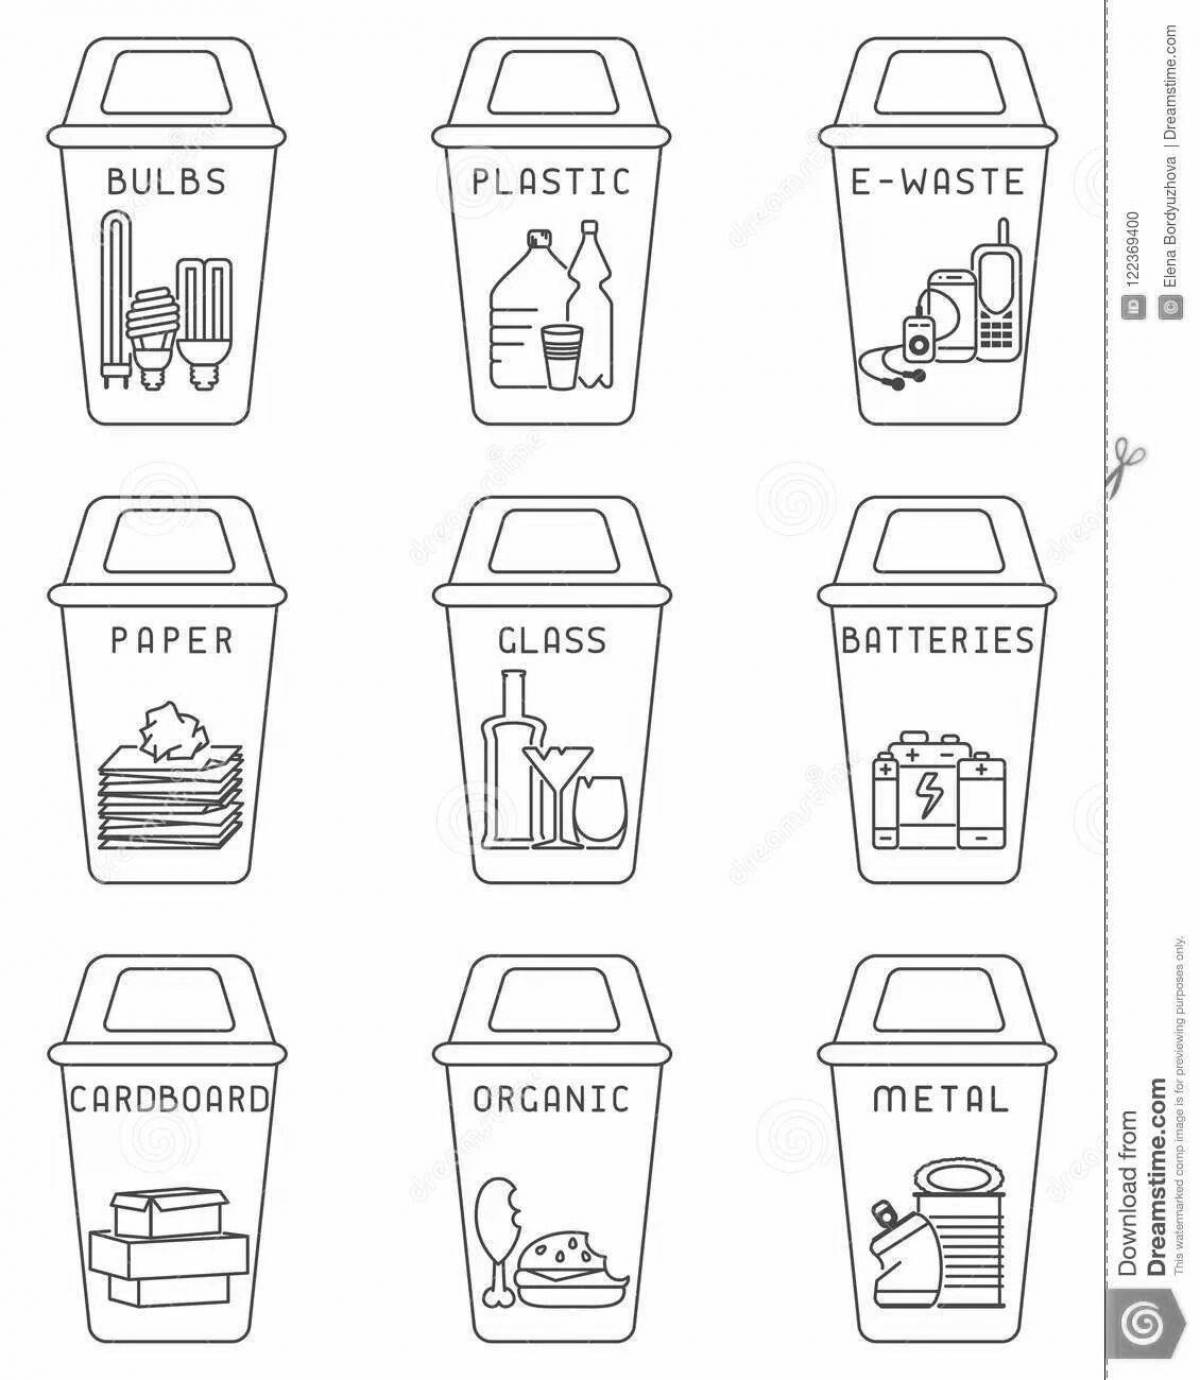 Charming separate waste collection page